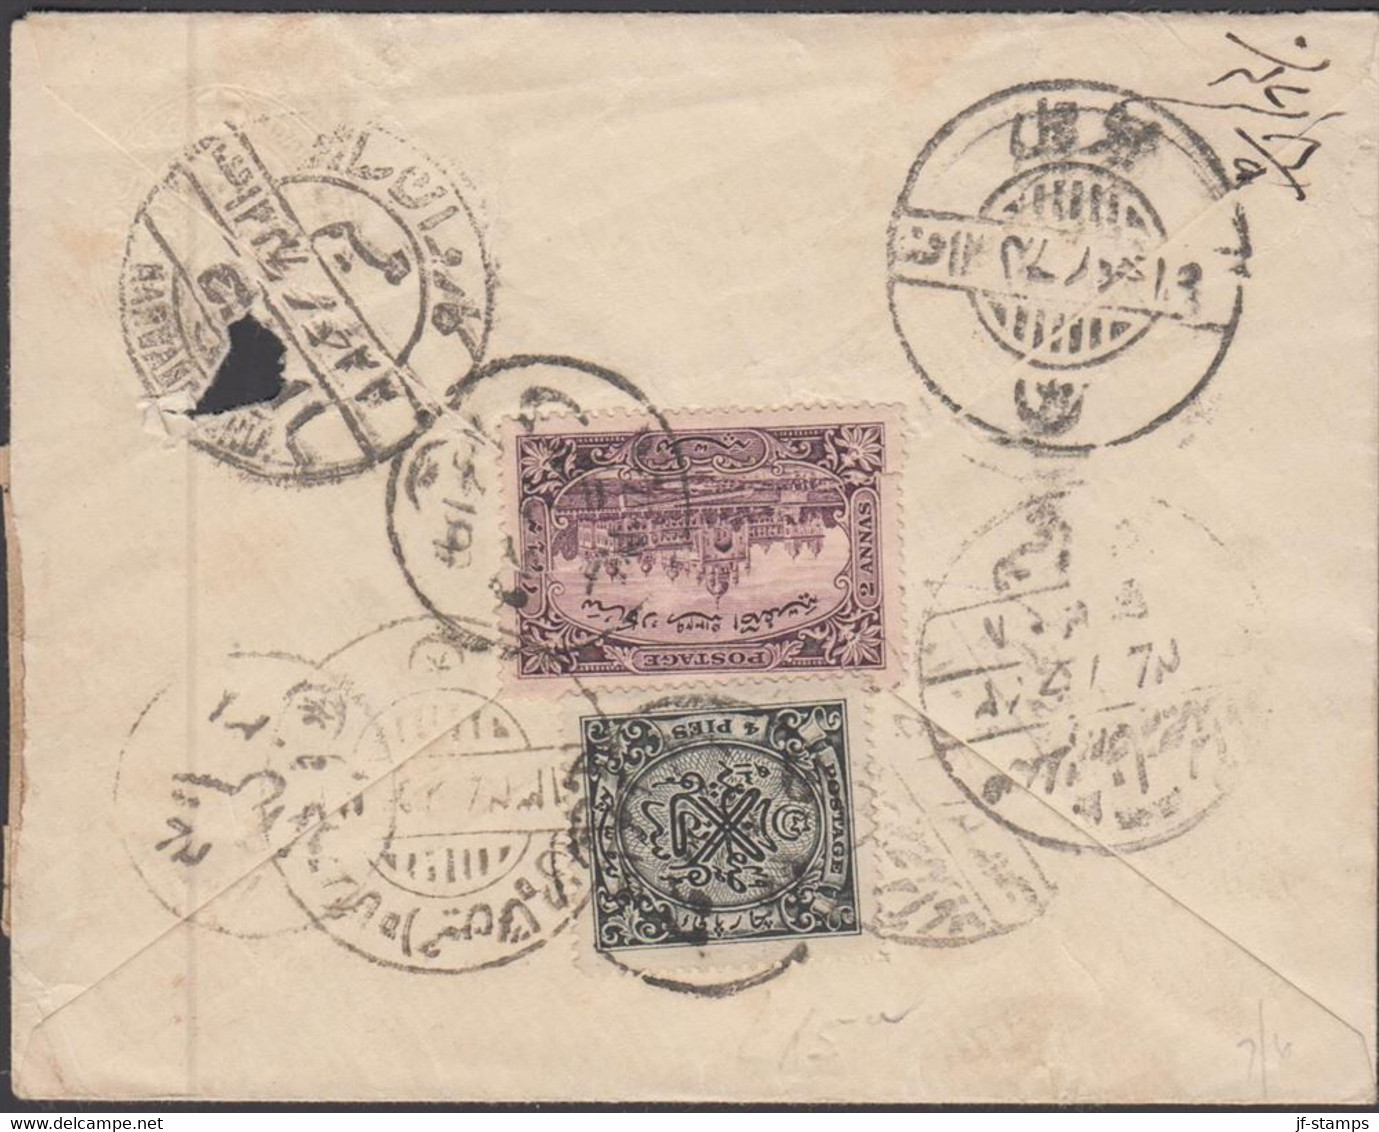 19??. HYDERABAD. 8 PIES ENVELOPE (defect)  Registered. Reverse 2 Stamps 4 PIES And 2 ANNAS (de... (Michel 31) - JF426647 - Chamba